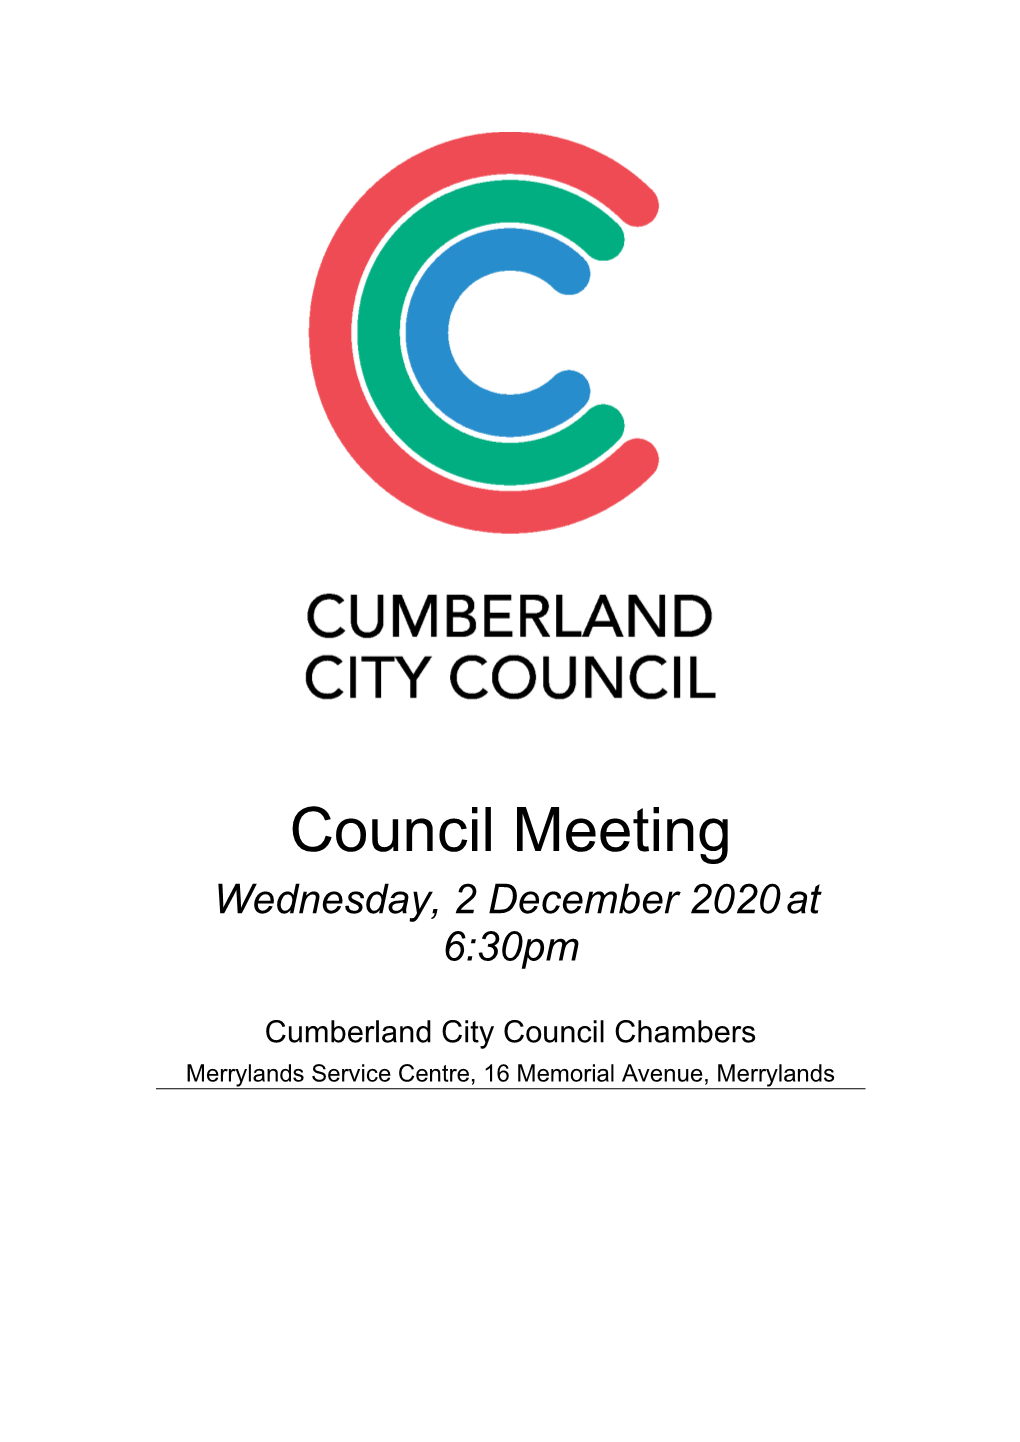 Late Agenda of Council Meeting